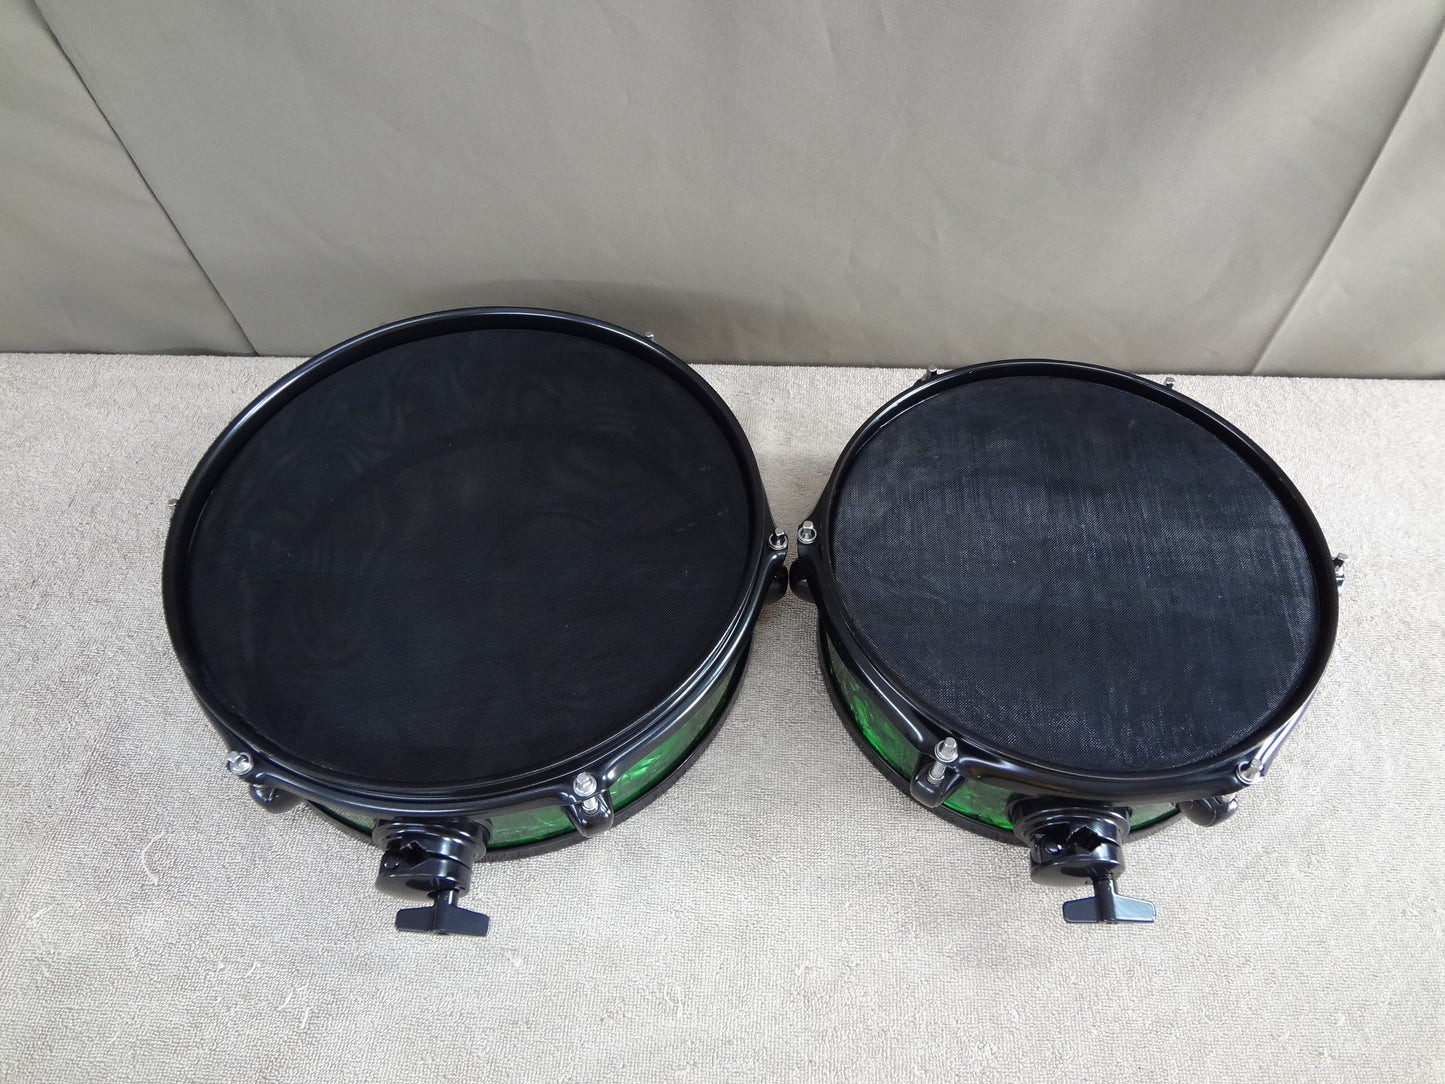 NEW 4 PIECE ELECTRONIC DRUM SHELL PACK.